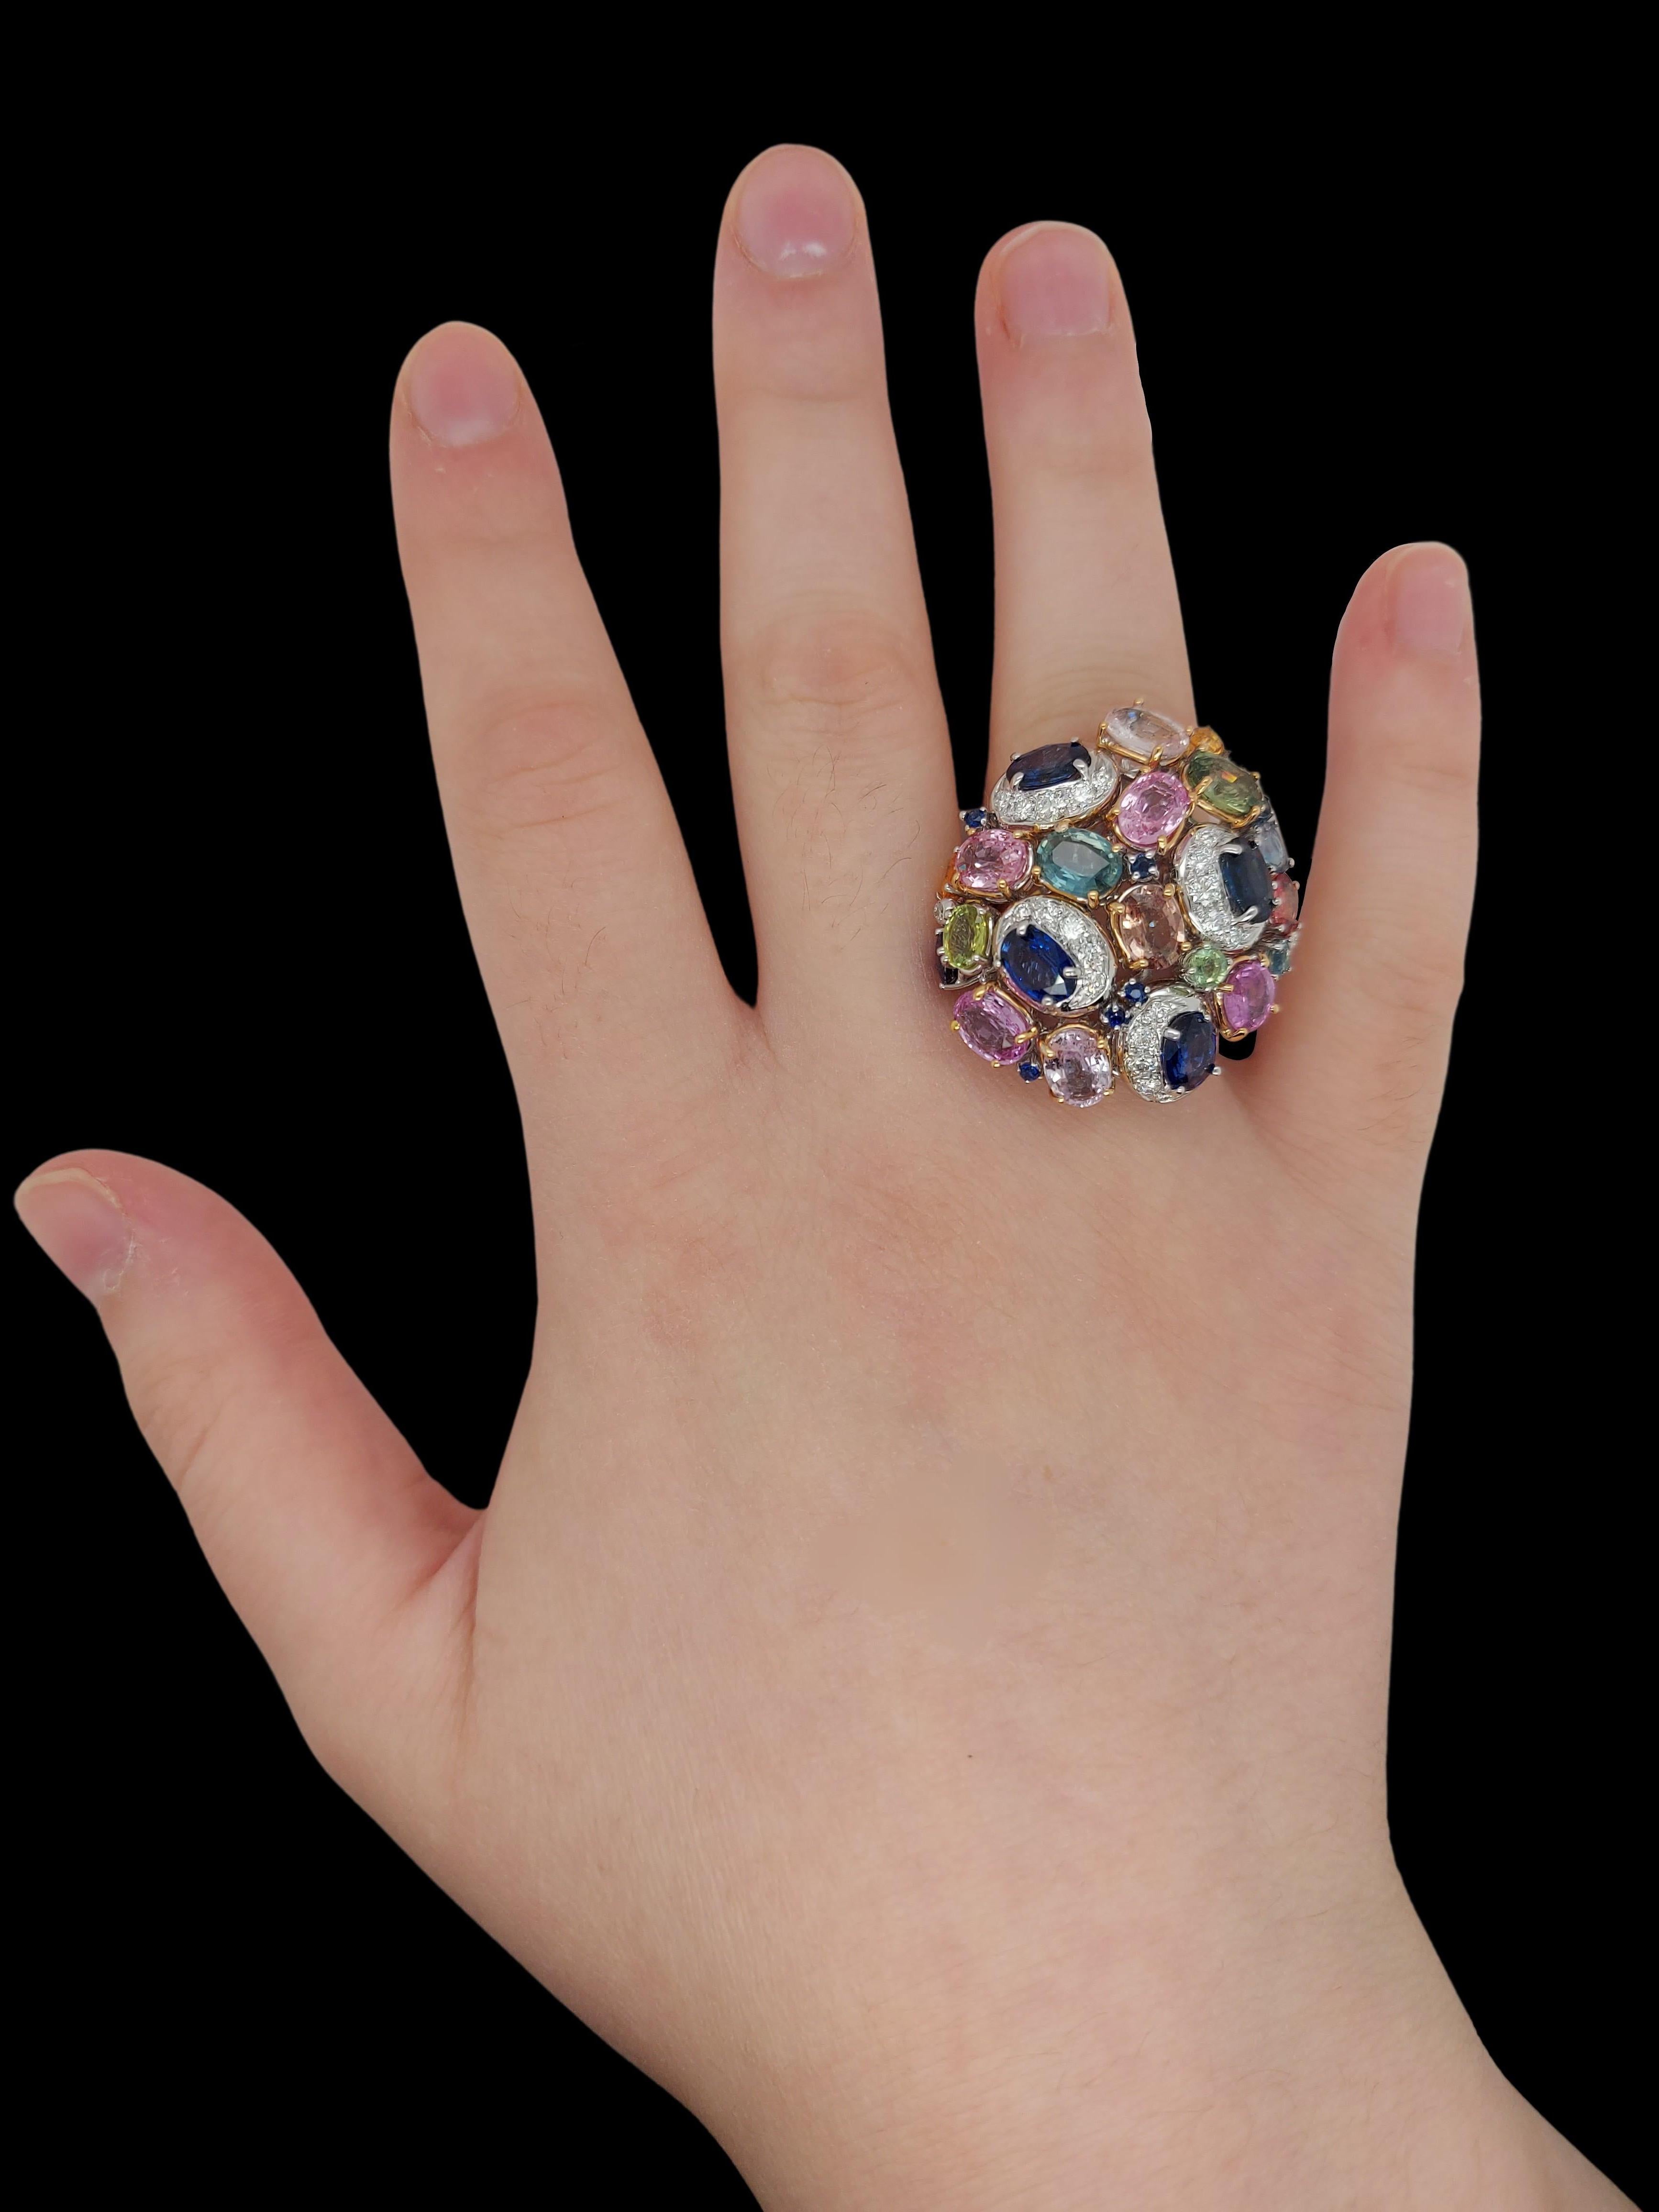 Fabulous 18kt White Gold Ring with Diamonds and Semi Precious Stones For Sale 4